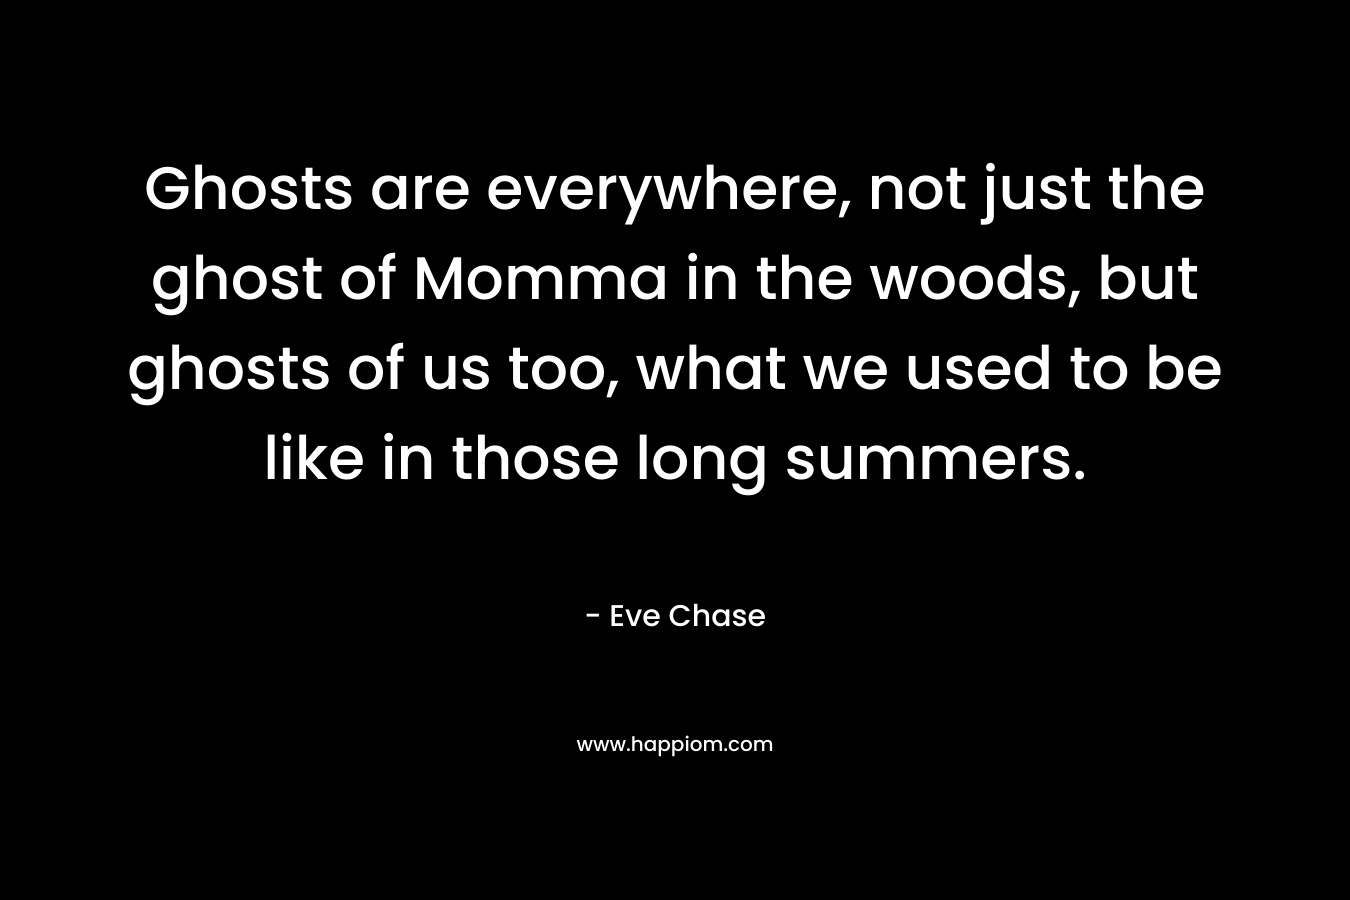 Ghosts are everywhere, not just the ghost of Momma in the woods, but ghosts of us too, what we used to be like in those long summers.